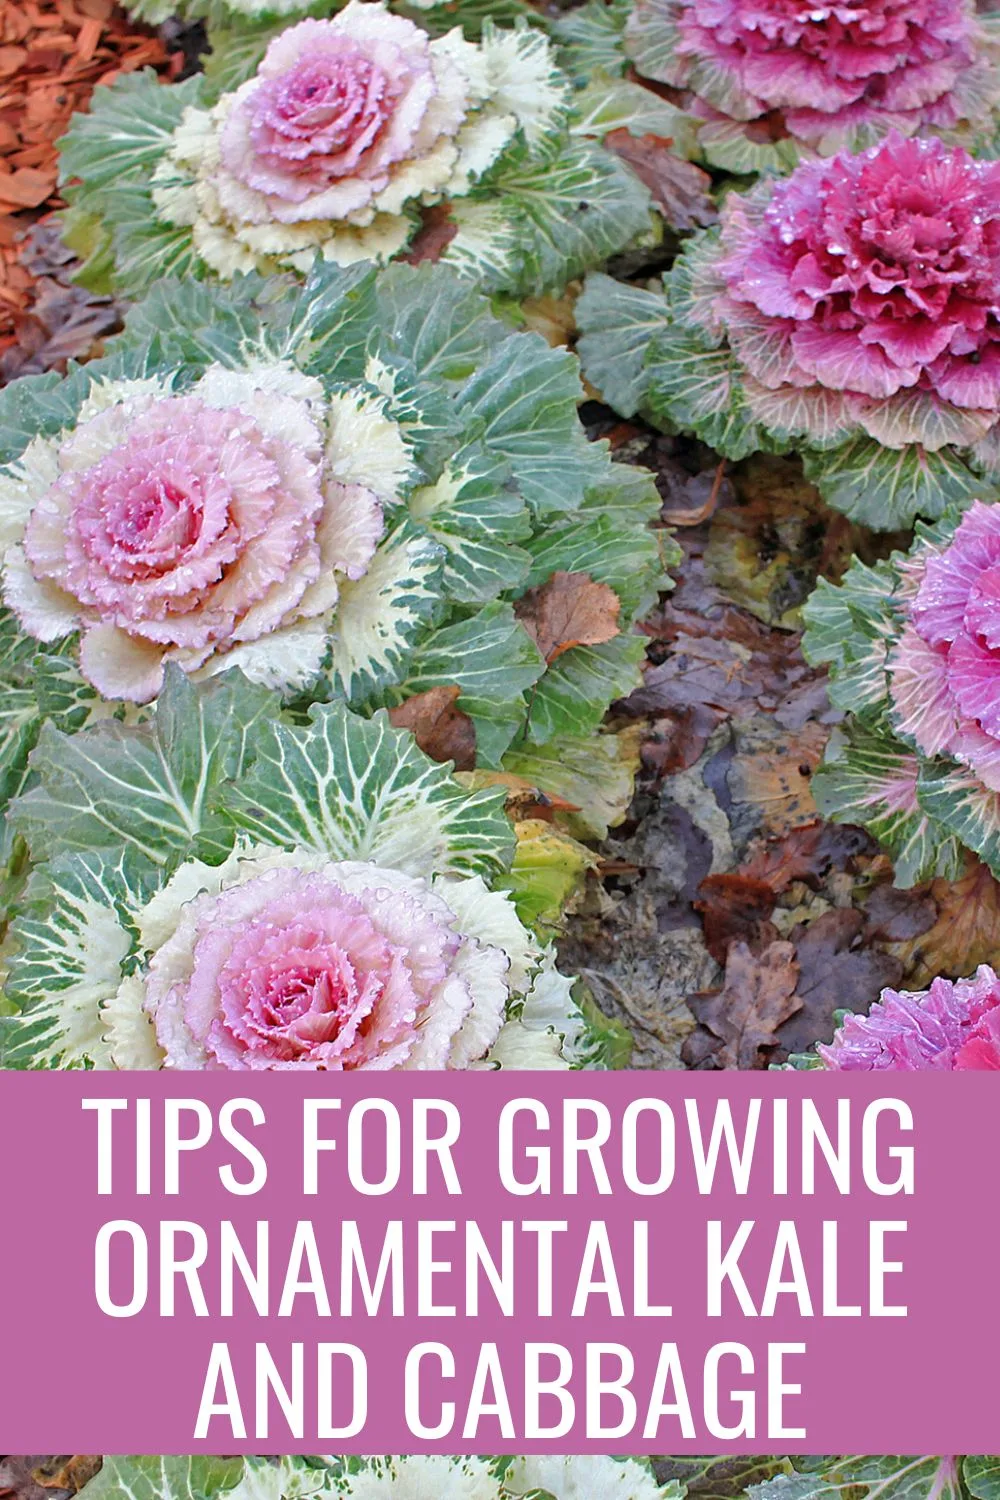 Tips for growing ornamental kale and cabbage.